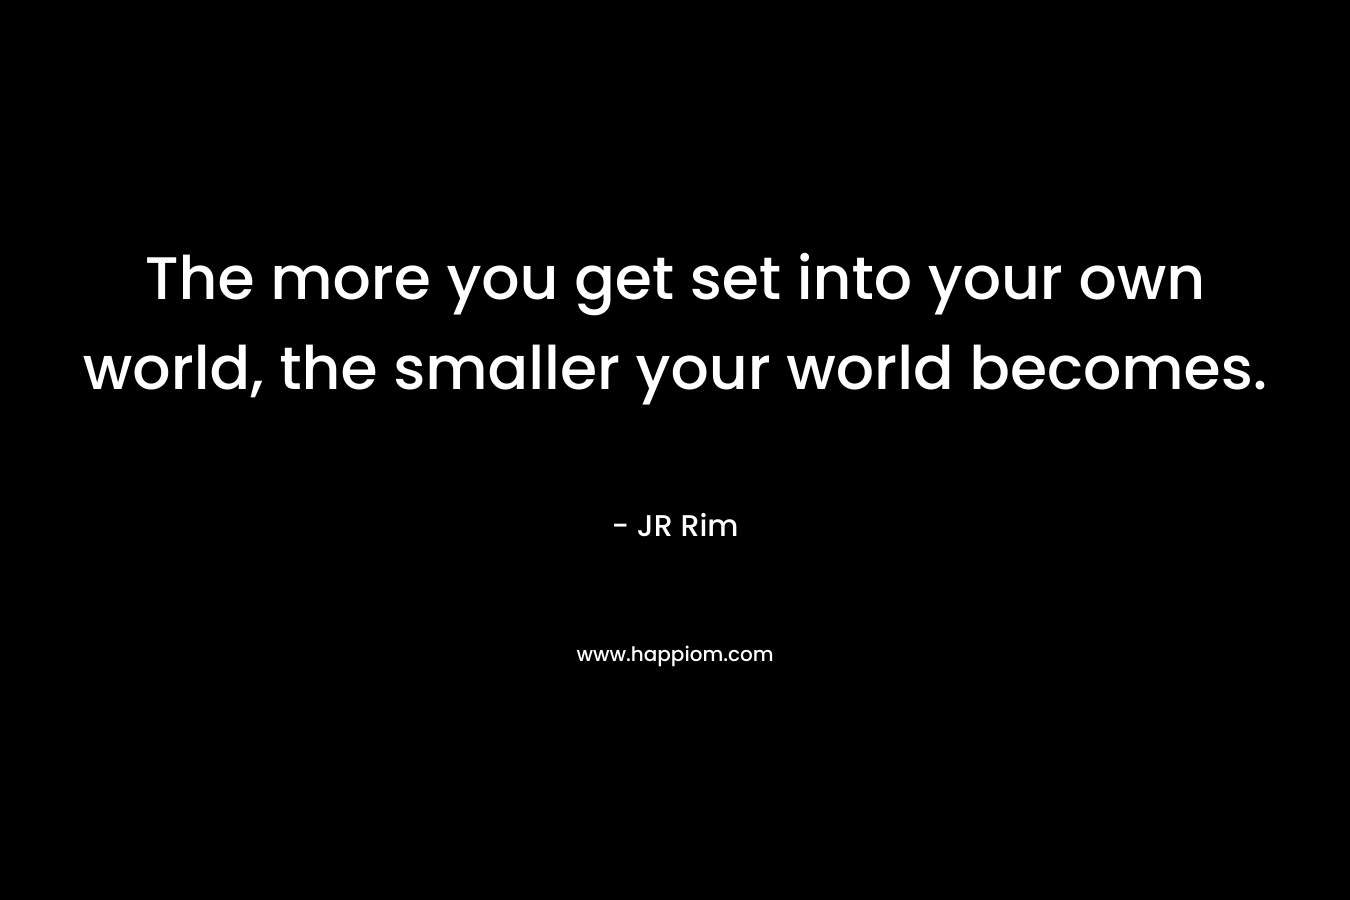 The more you get set into your own world, the smaller your world becomes.